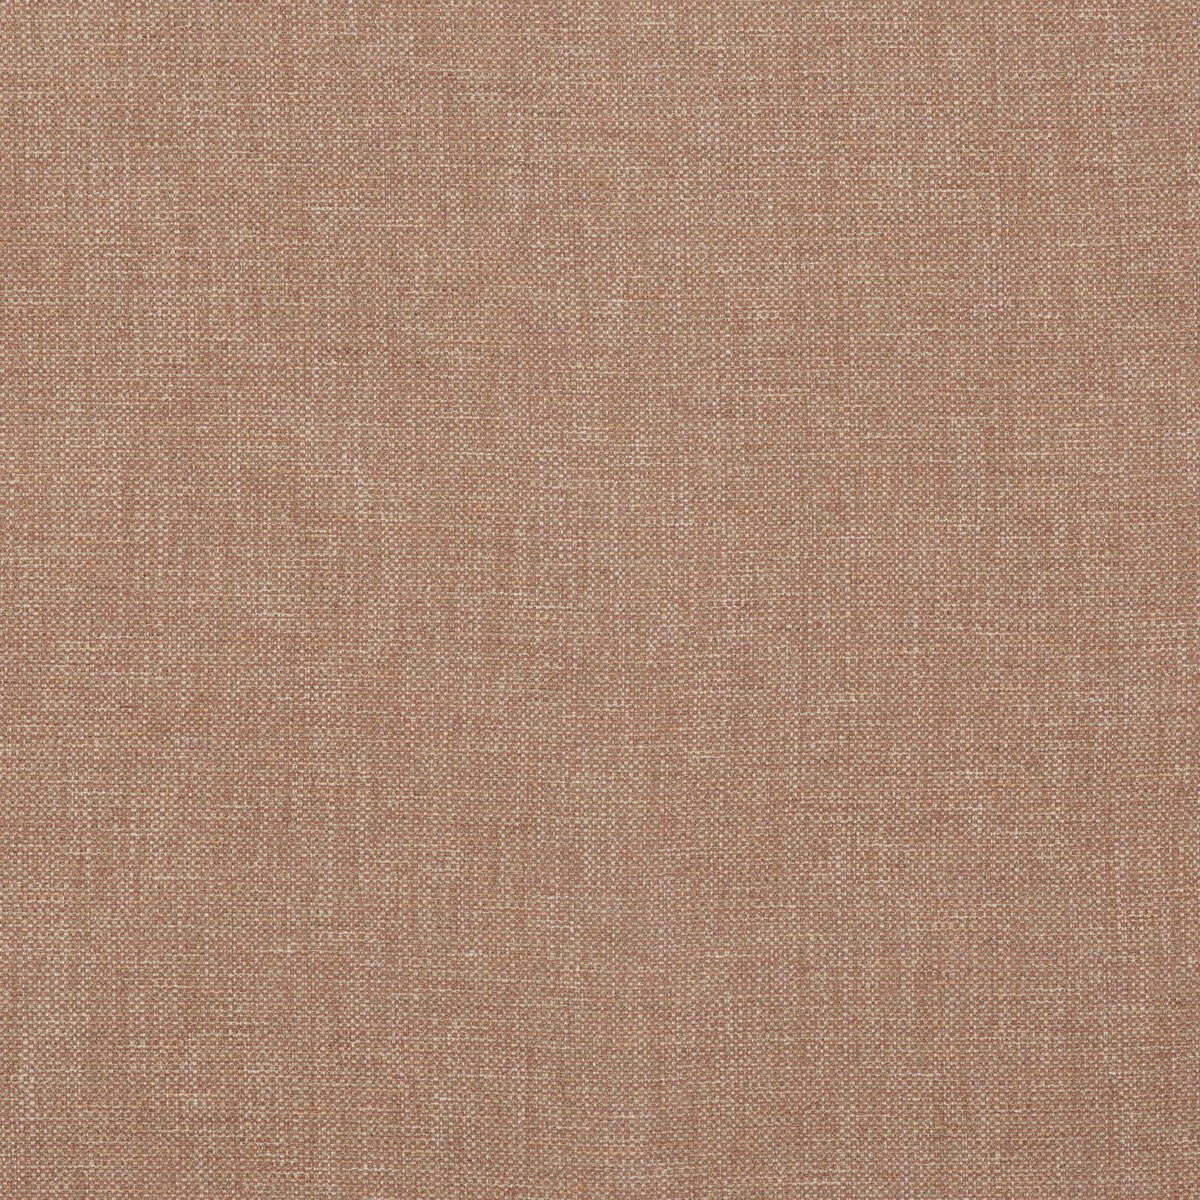 Pentridge fabric in blush color - pattern BF10956.440.0 - by G P &amp; J Baker in the Baker House Textures collection